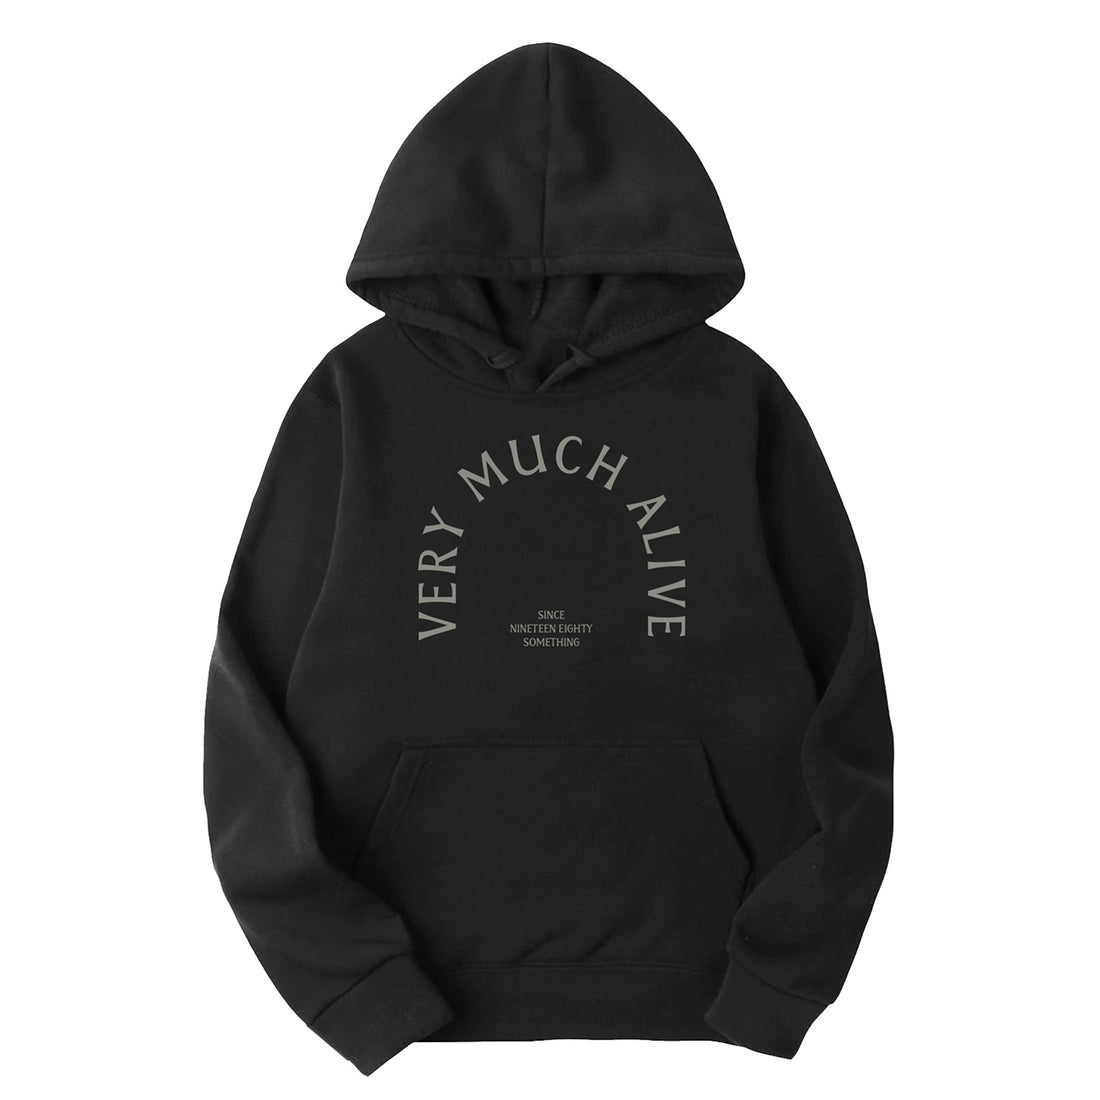 Emo’s Not Dead, Band Merch, Very Much Alive Hoodie